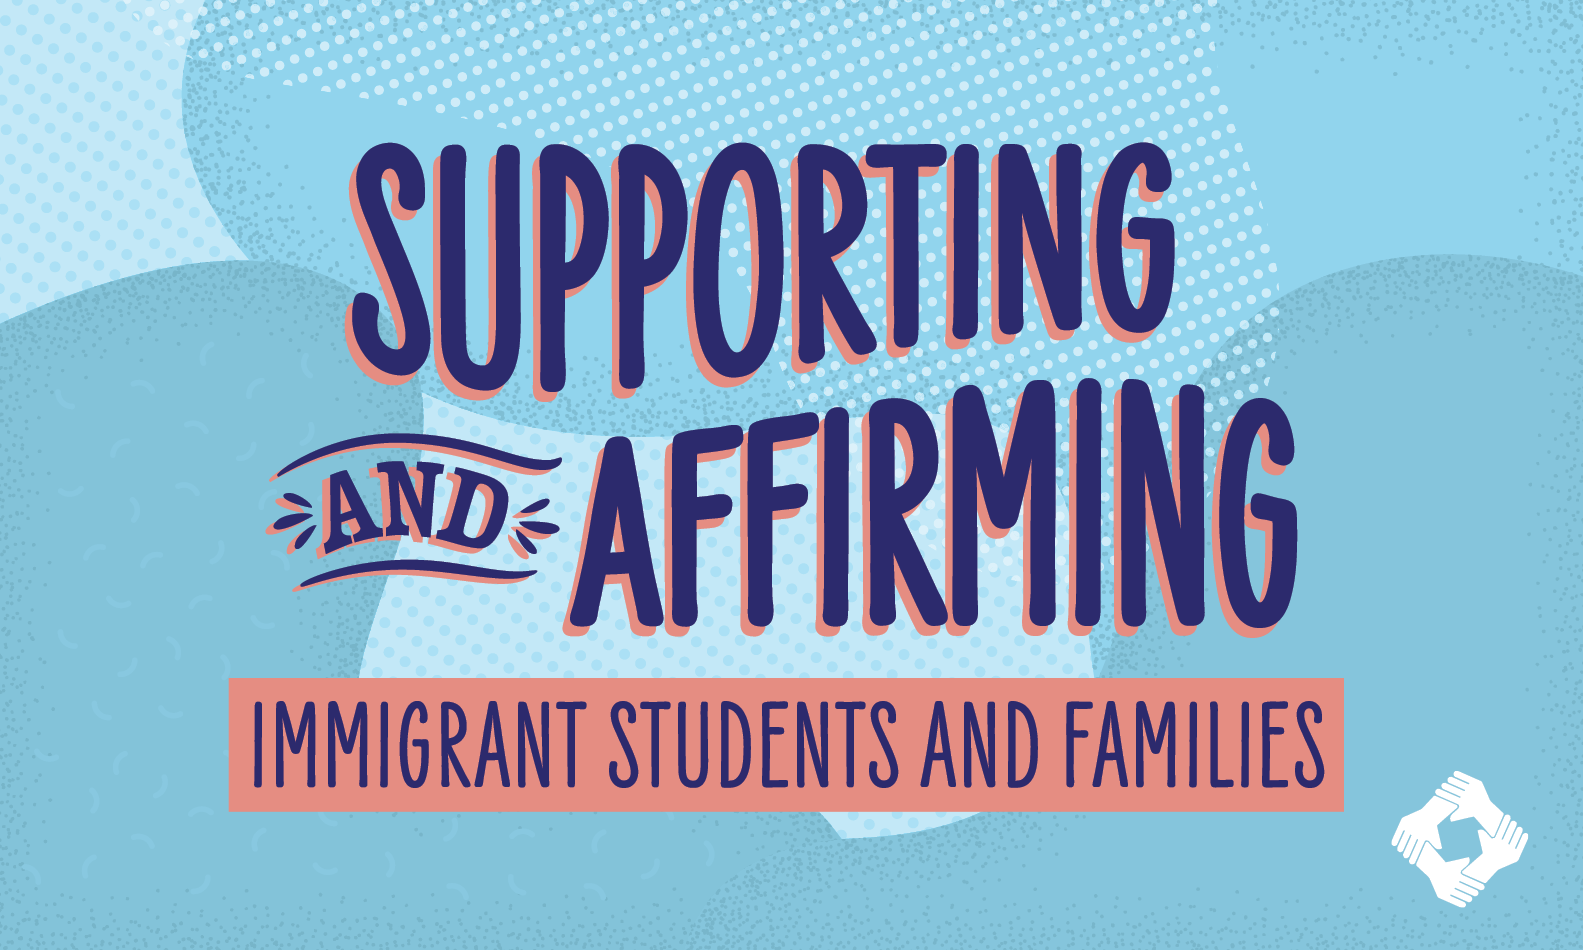 Supporting and Affirming Immigrant Students and Families Artwork